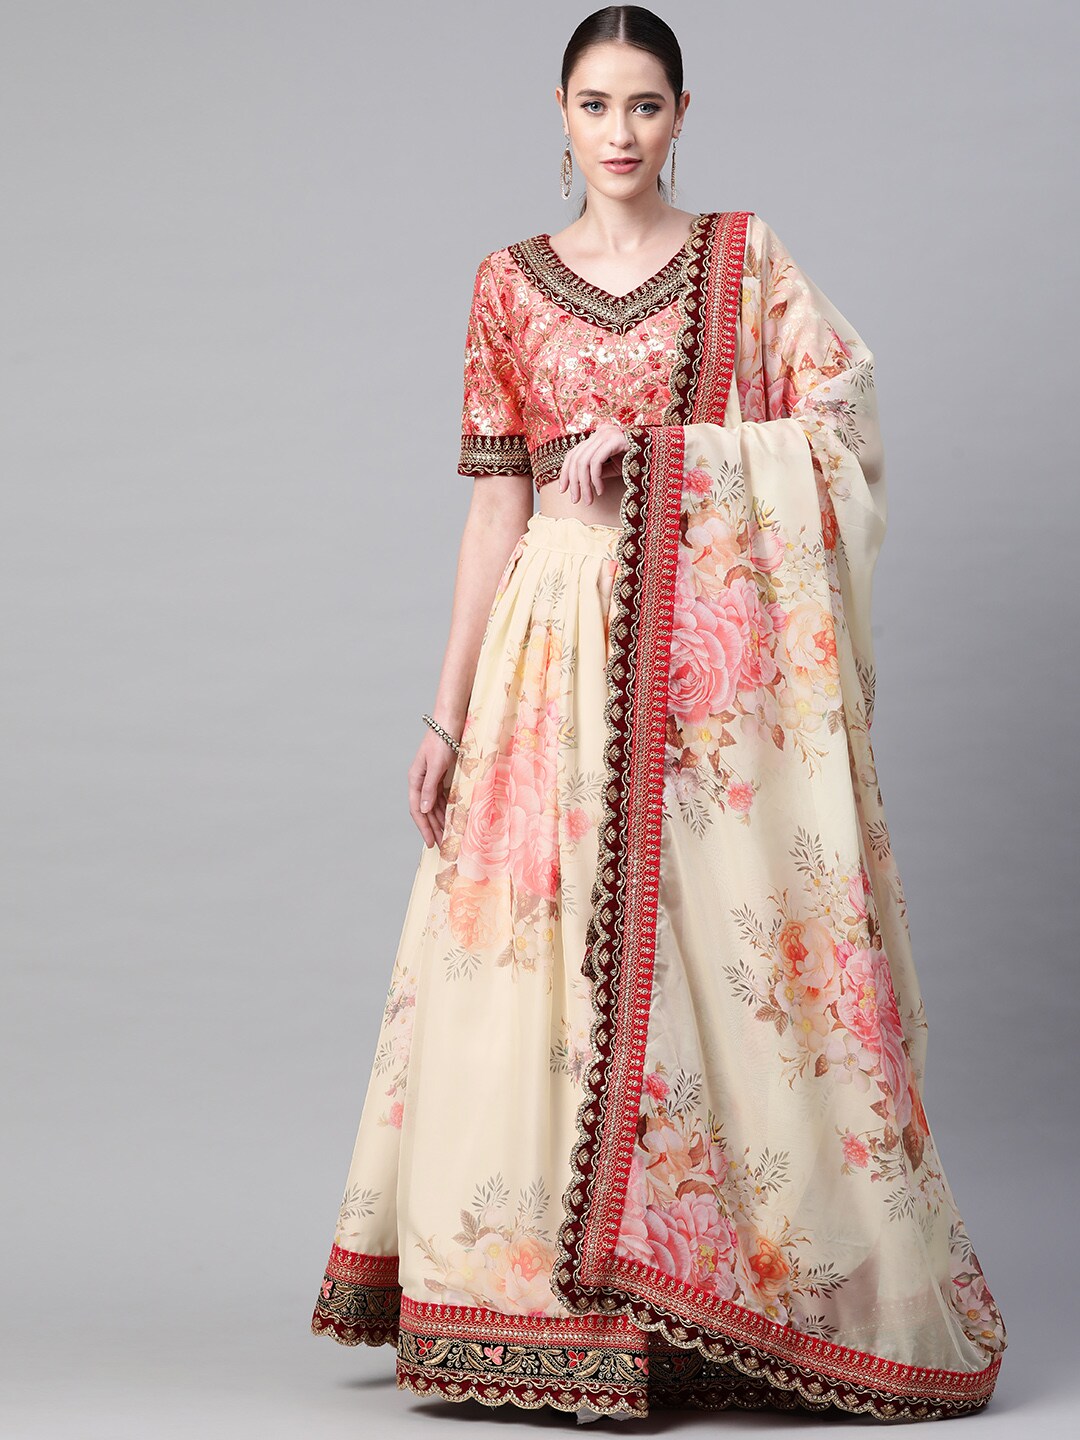 Readiprint Fashions Beige & Pink Embroidered Semi-Stitched Lehenga & Blouse with Dupatta Price in India